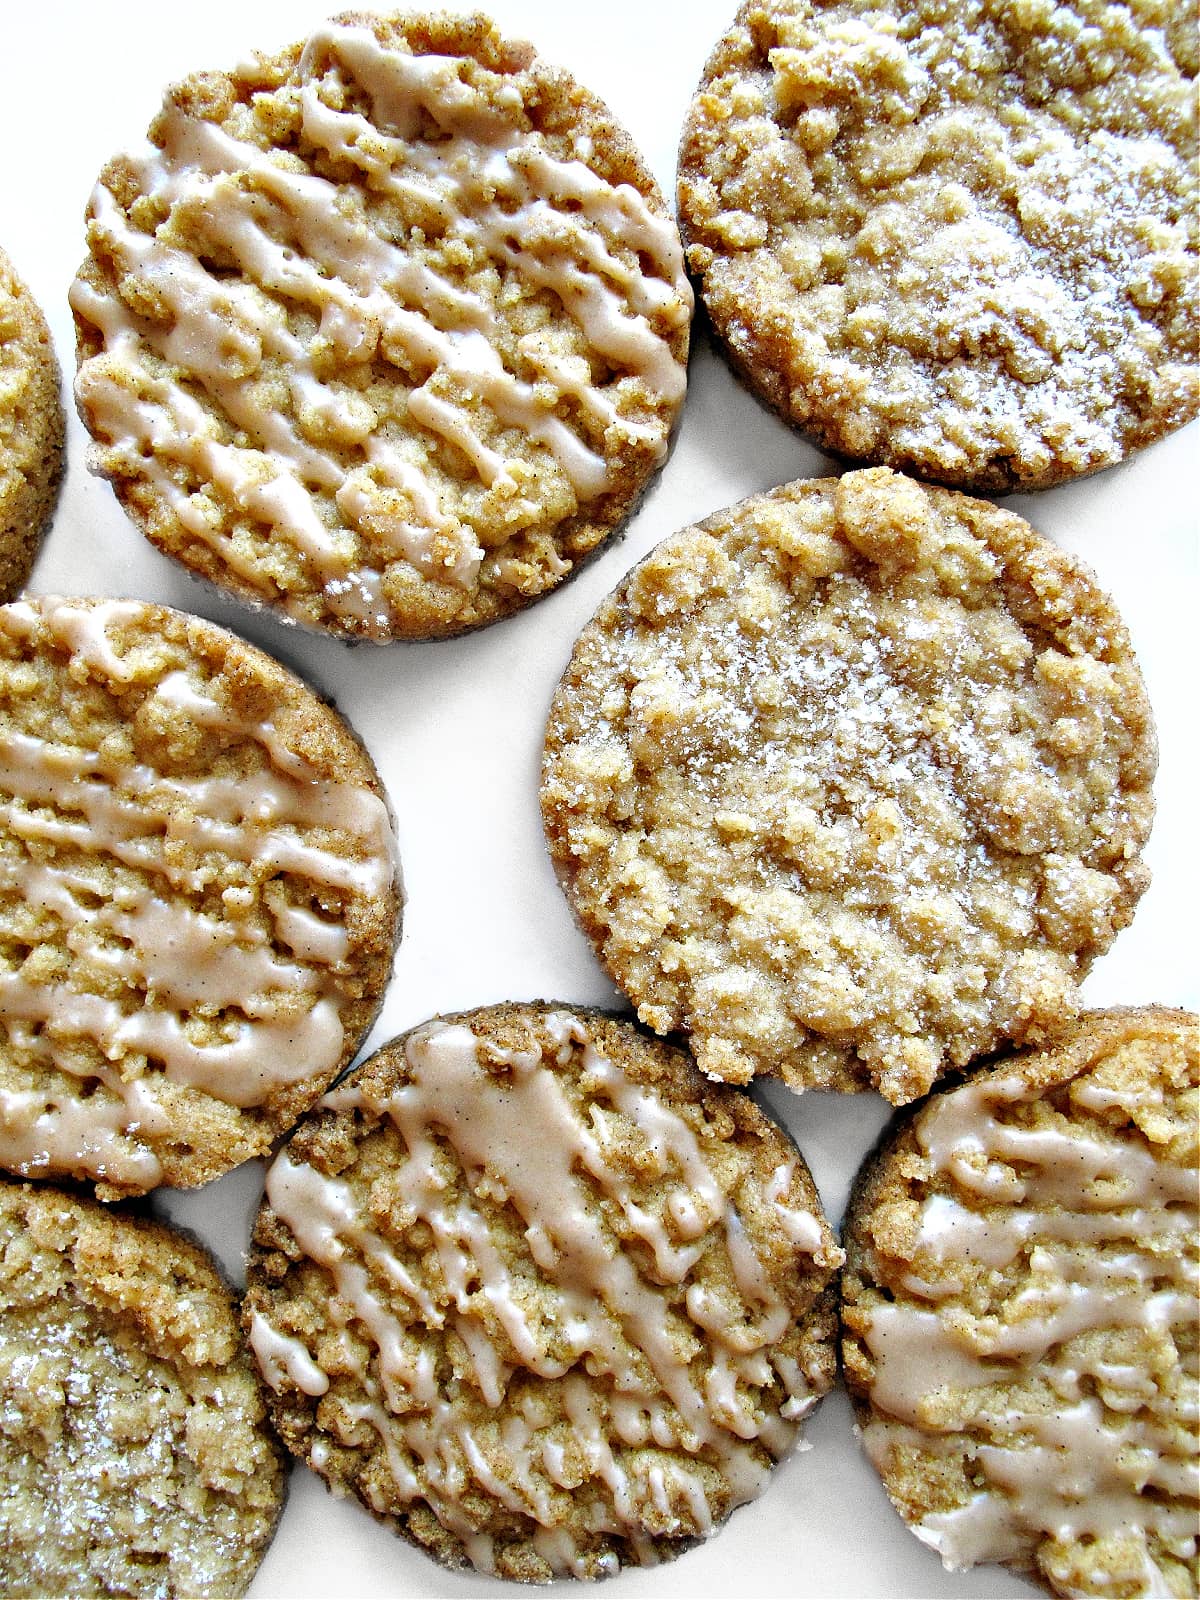 Streusel Cookies with powdered sugar or icing drizzle.